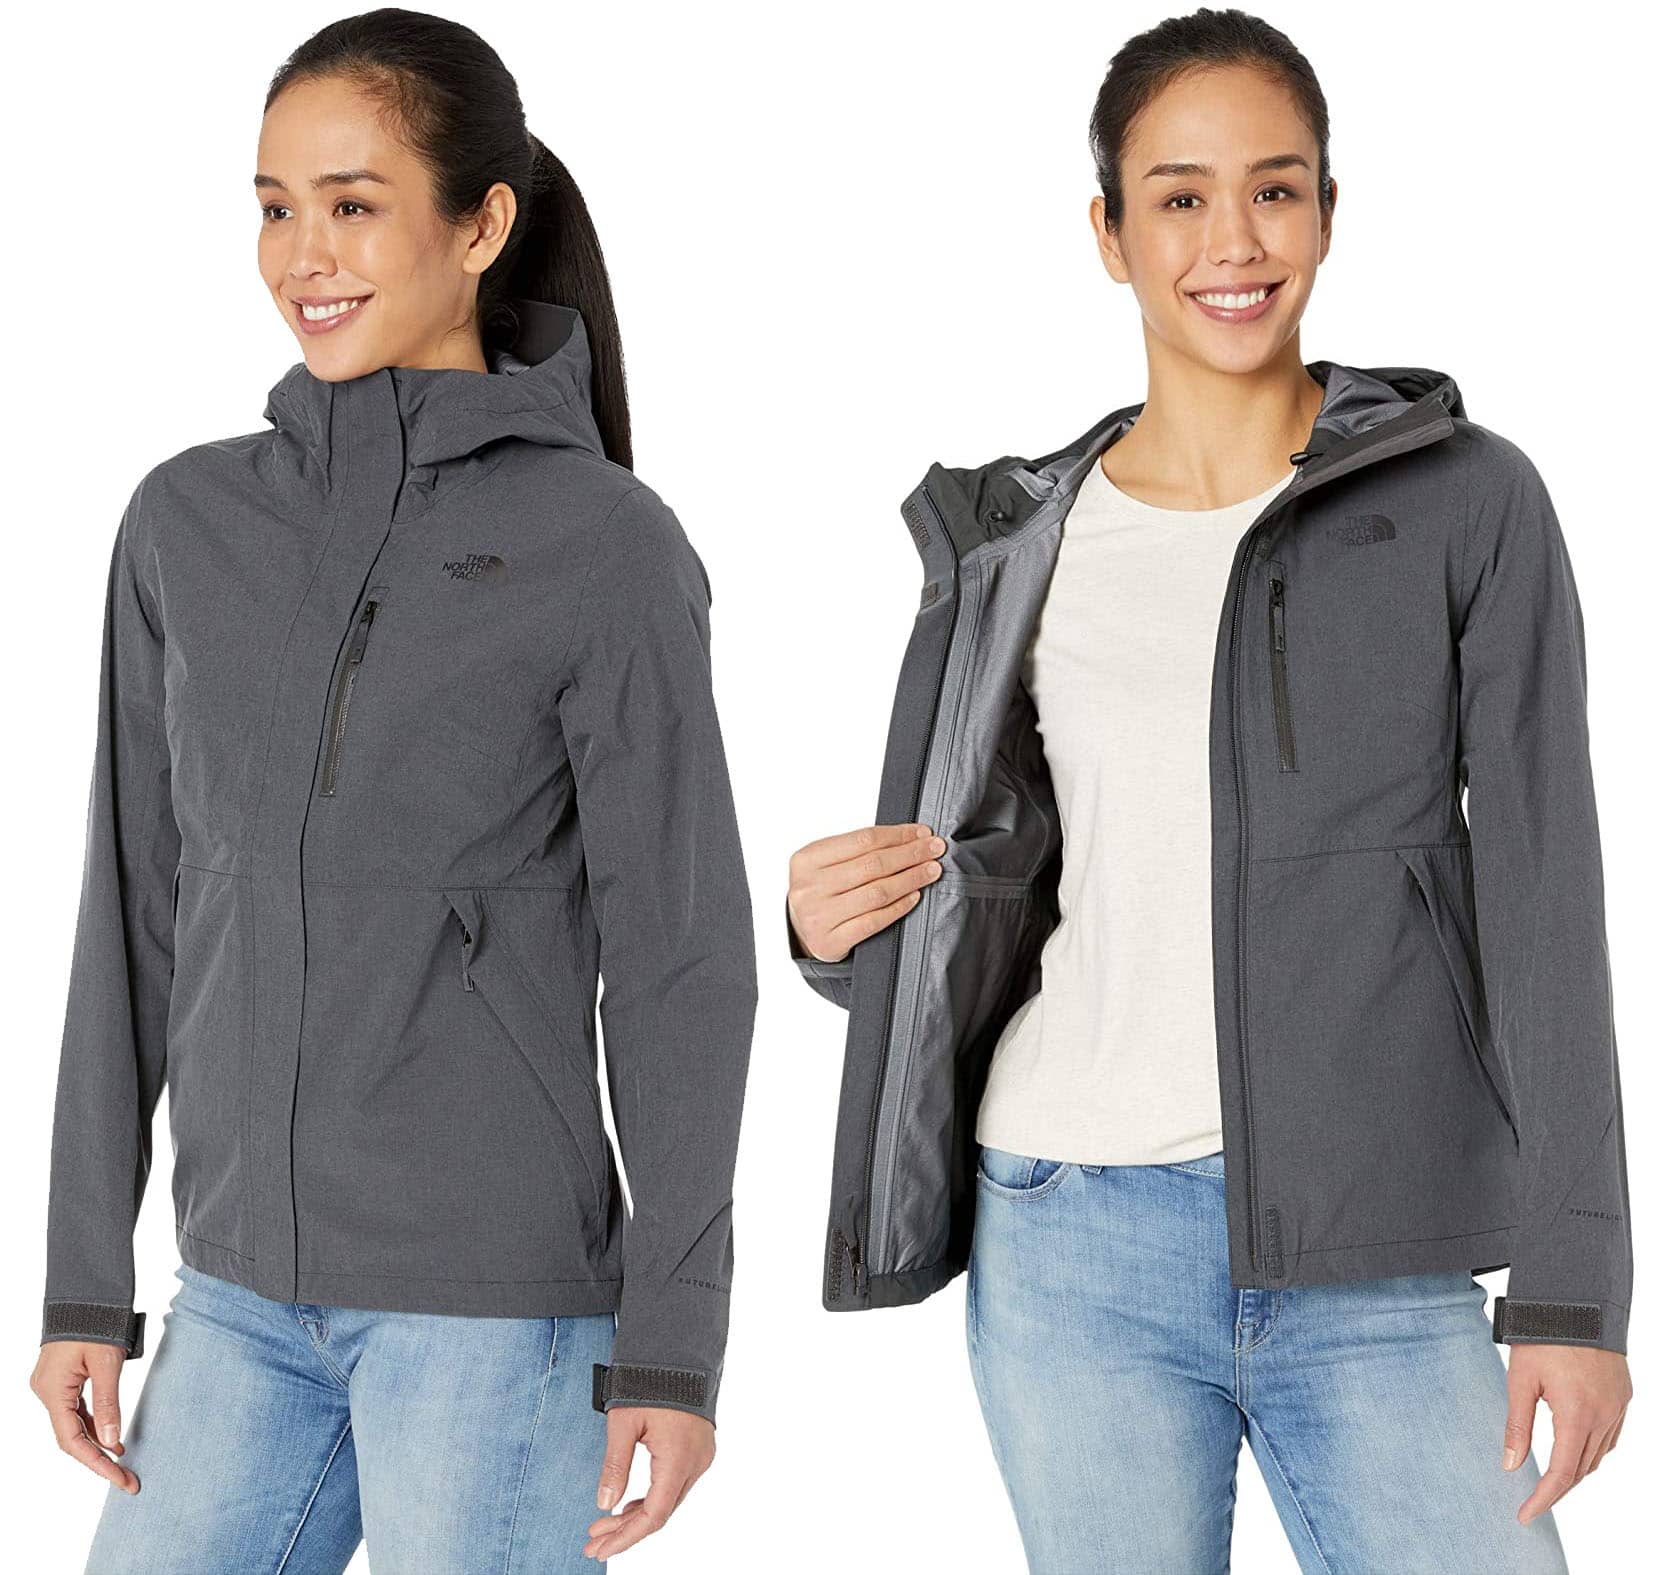 Made from recycled fabric, this lightweight rain jacket provides full coverage with an adjustable hood and hook-and-loop cuff tabs